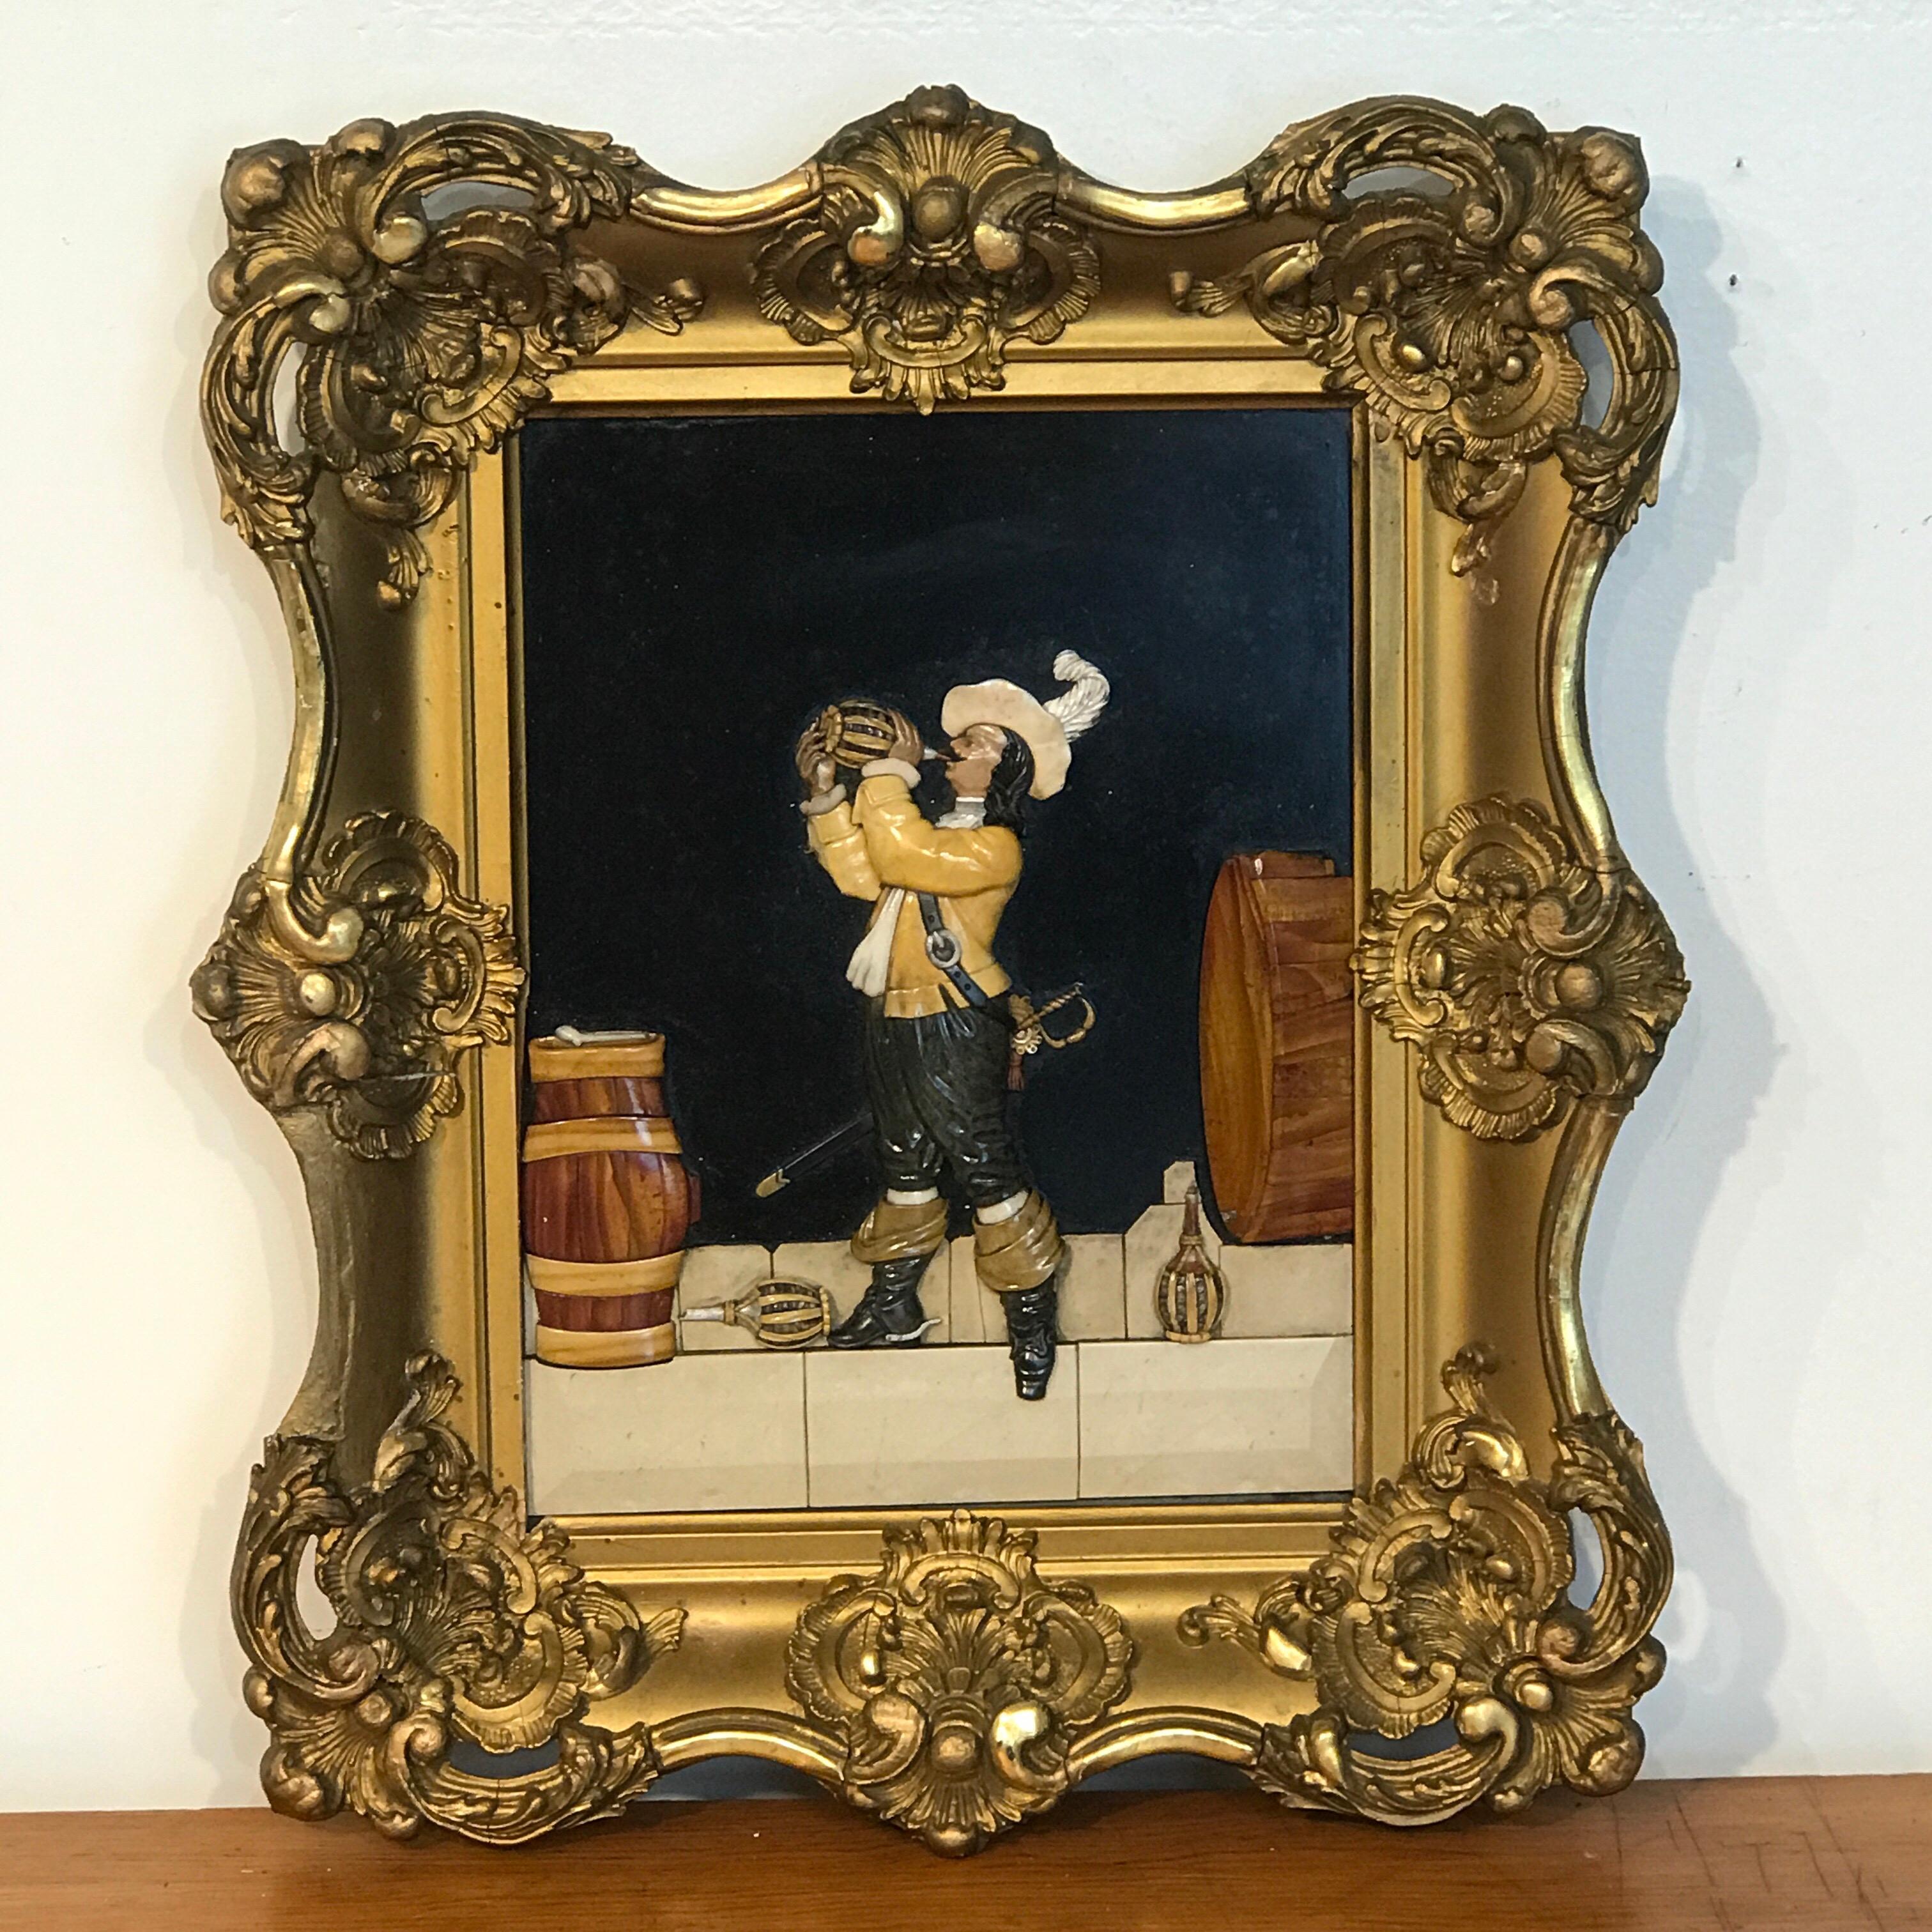 Antique Florentine Raised Pietra Dura Plaque of a Drinking Cavalier After Vinea

Presenting a singular piece of art, a stunning antique Florentine raised pietra dura plaque of a drinking cavalier after Vinea. This remarkable showpiece is a truly